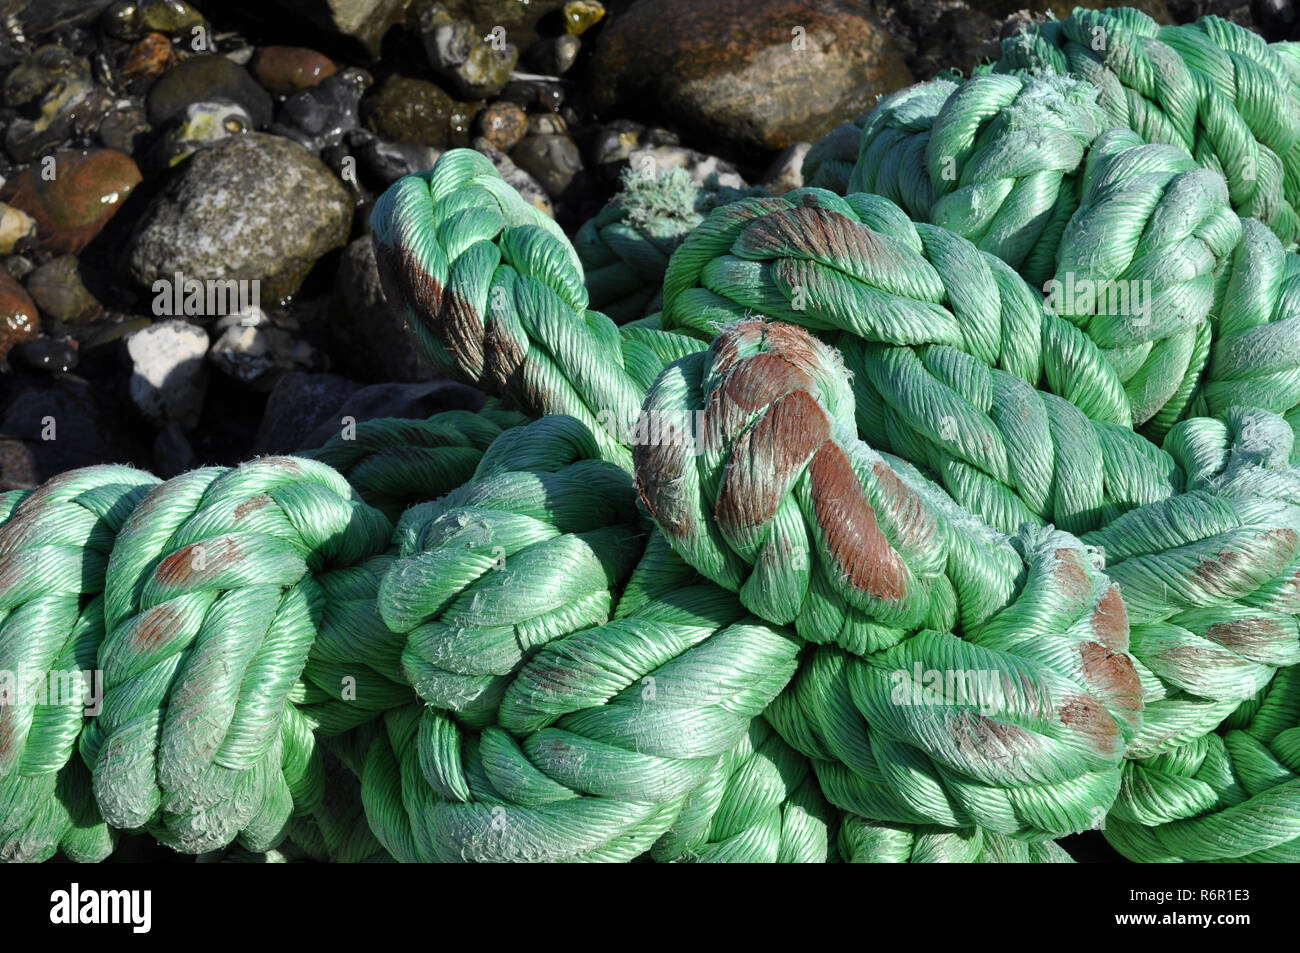 Beach goods with rope Stock Photo